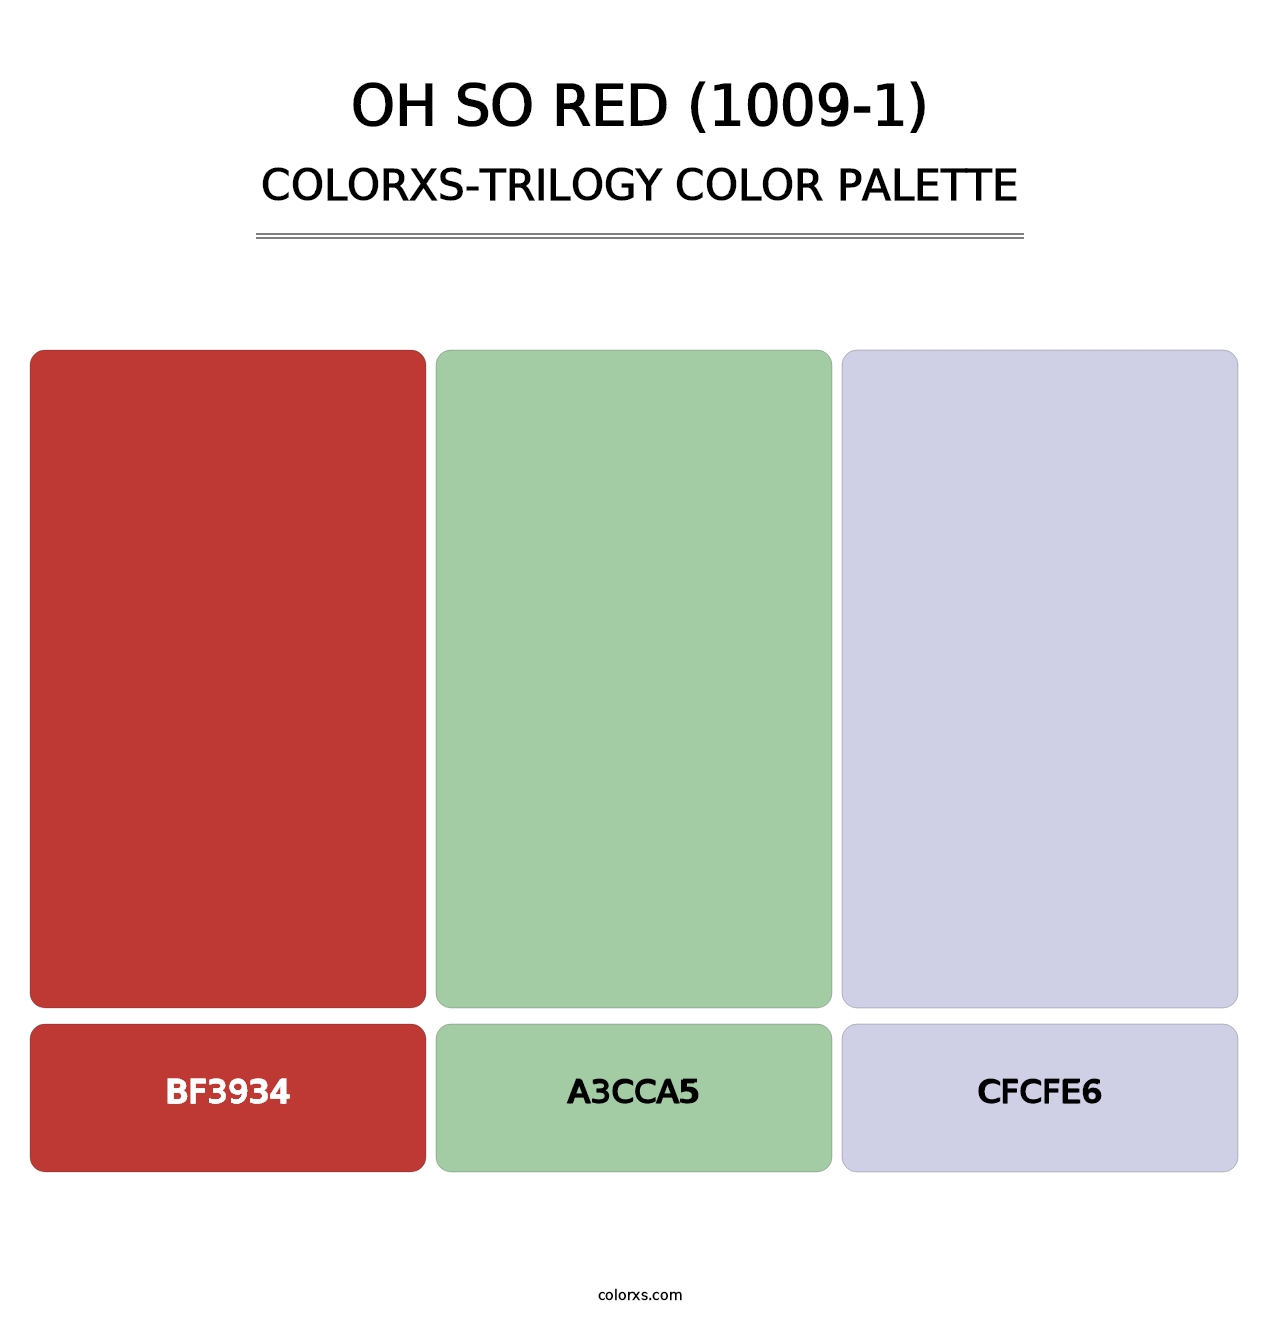 Oh So Red (1009-1) - Colorxs Trilogy Palette